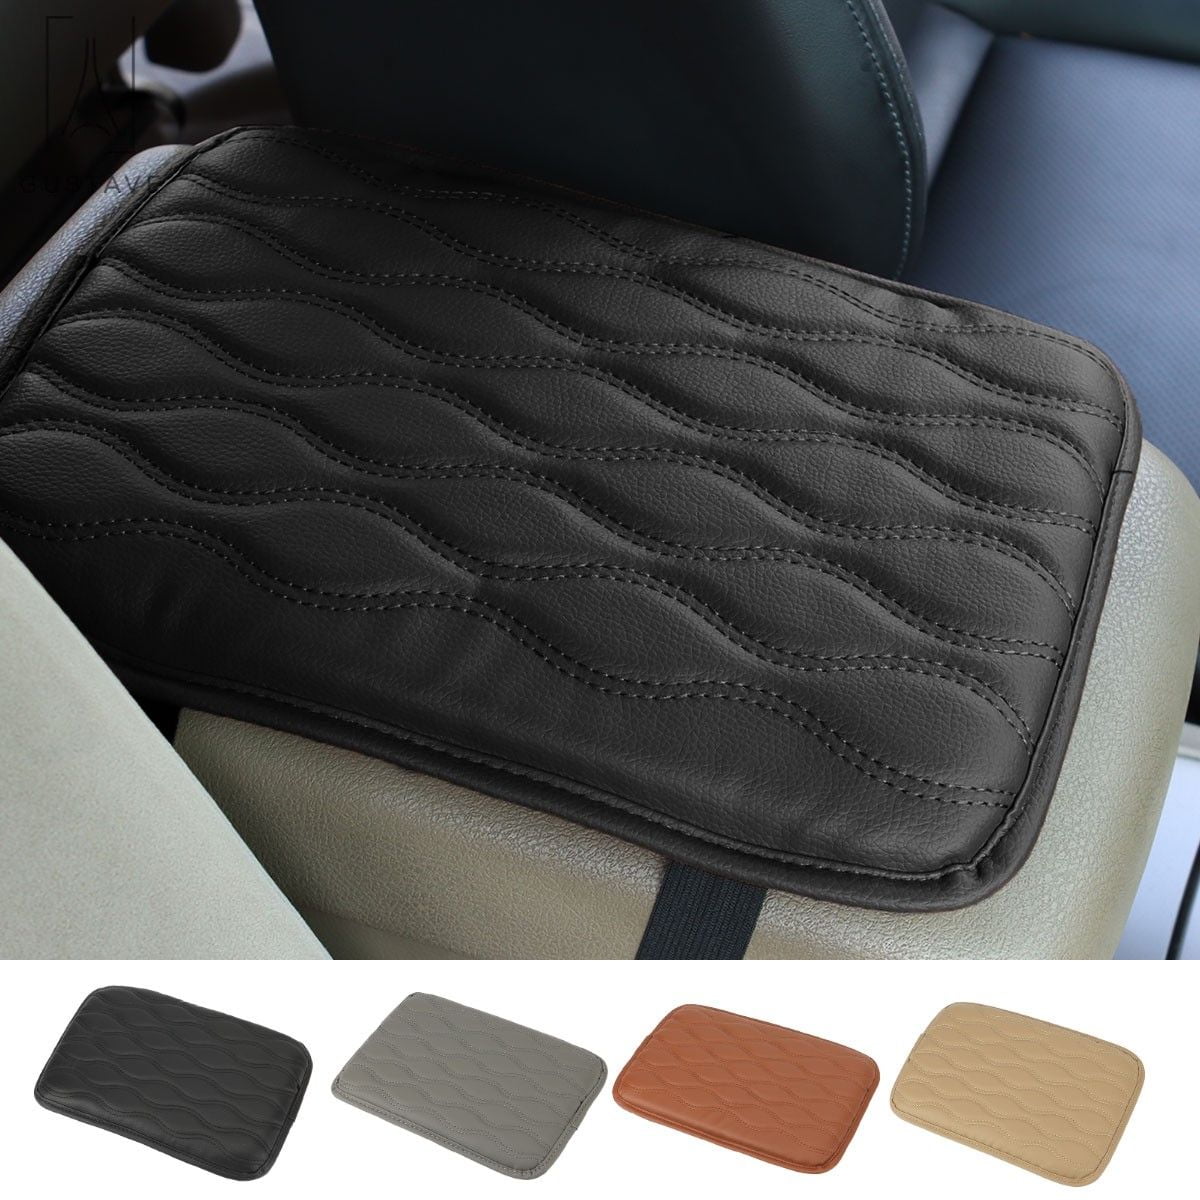 SEVEN SPARTA Universal Center Console Cover for Most Vehicle, SUV, Truck,  Car, Waterproof Armrest Cover Center Console Pad, Car Armrest Seat Box  Cover